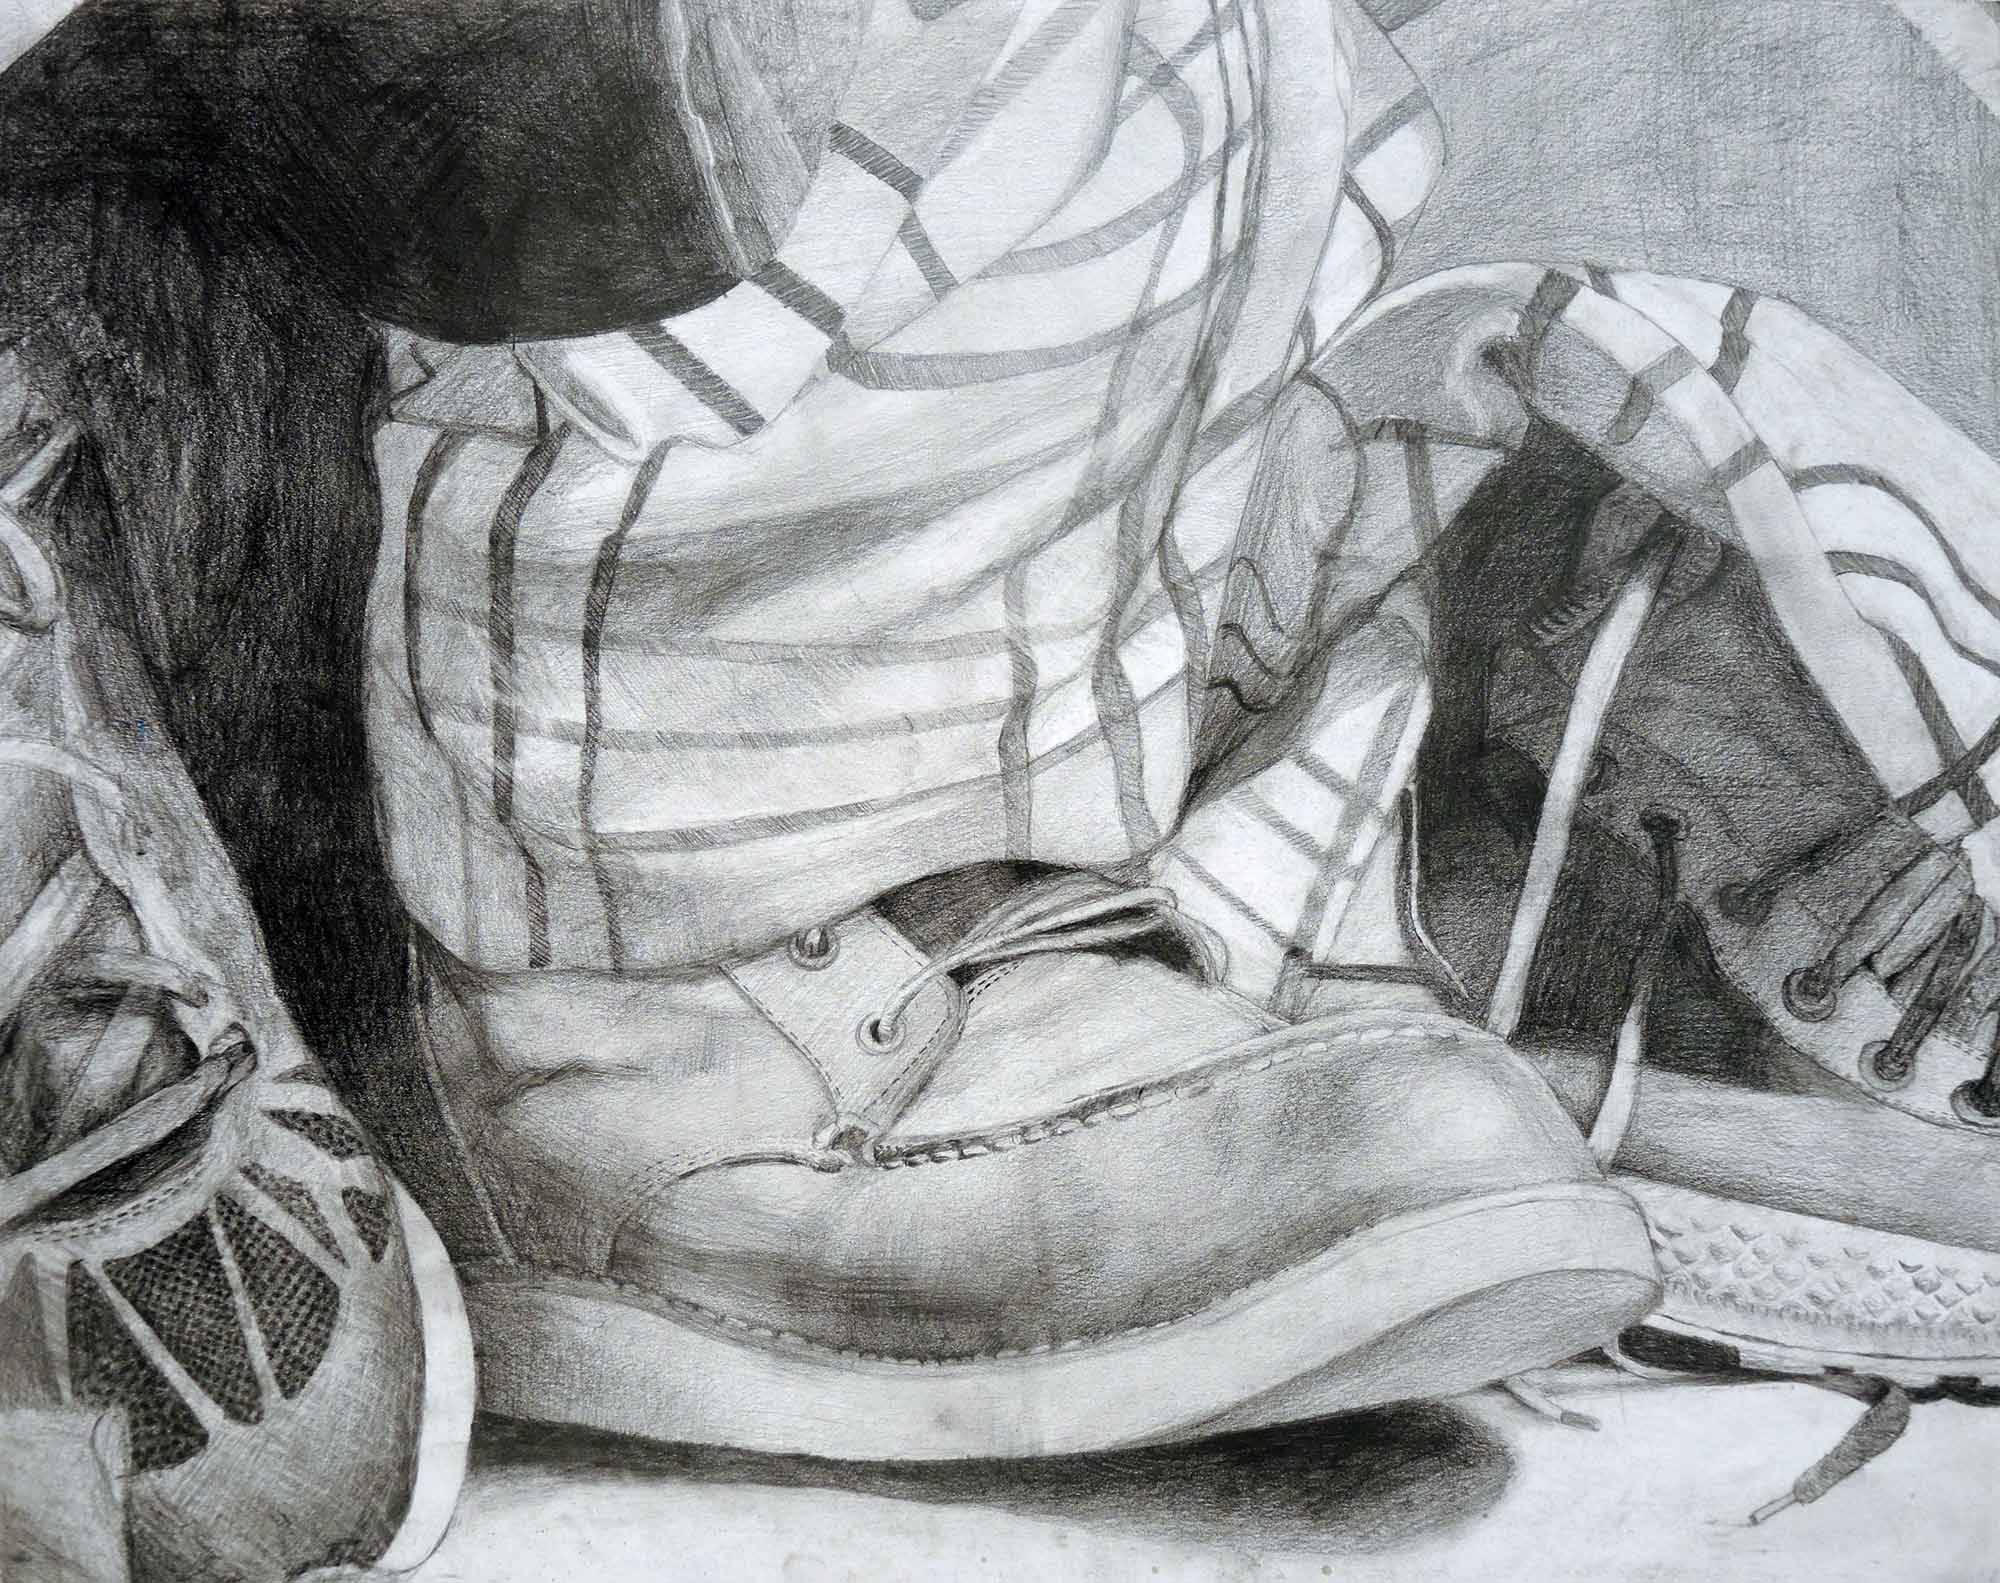 A drawing of shoes